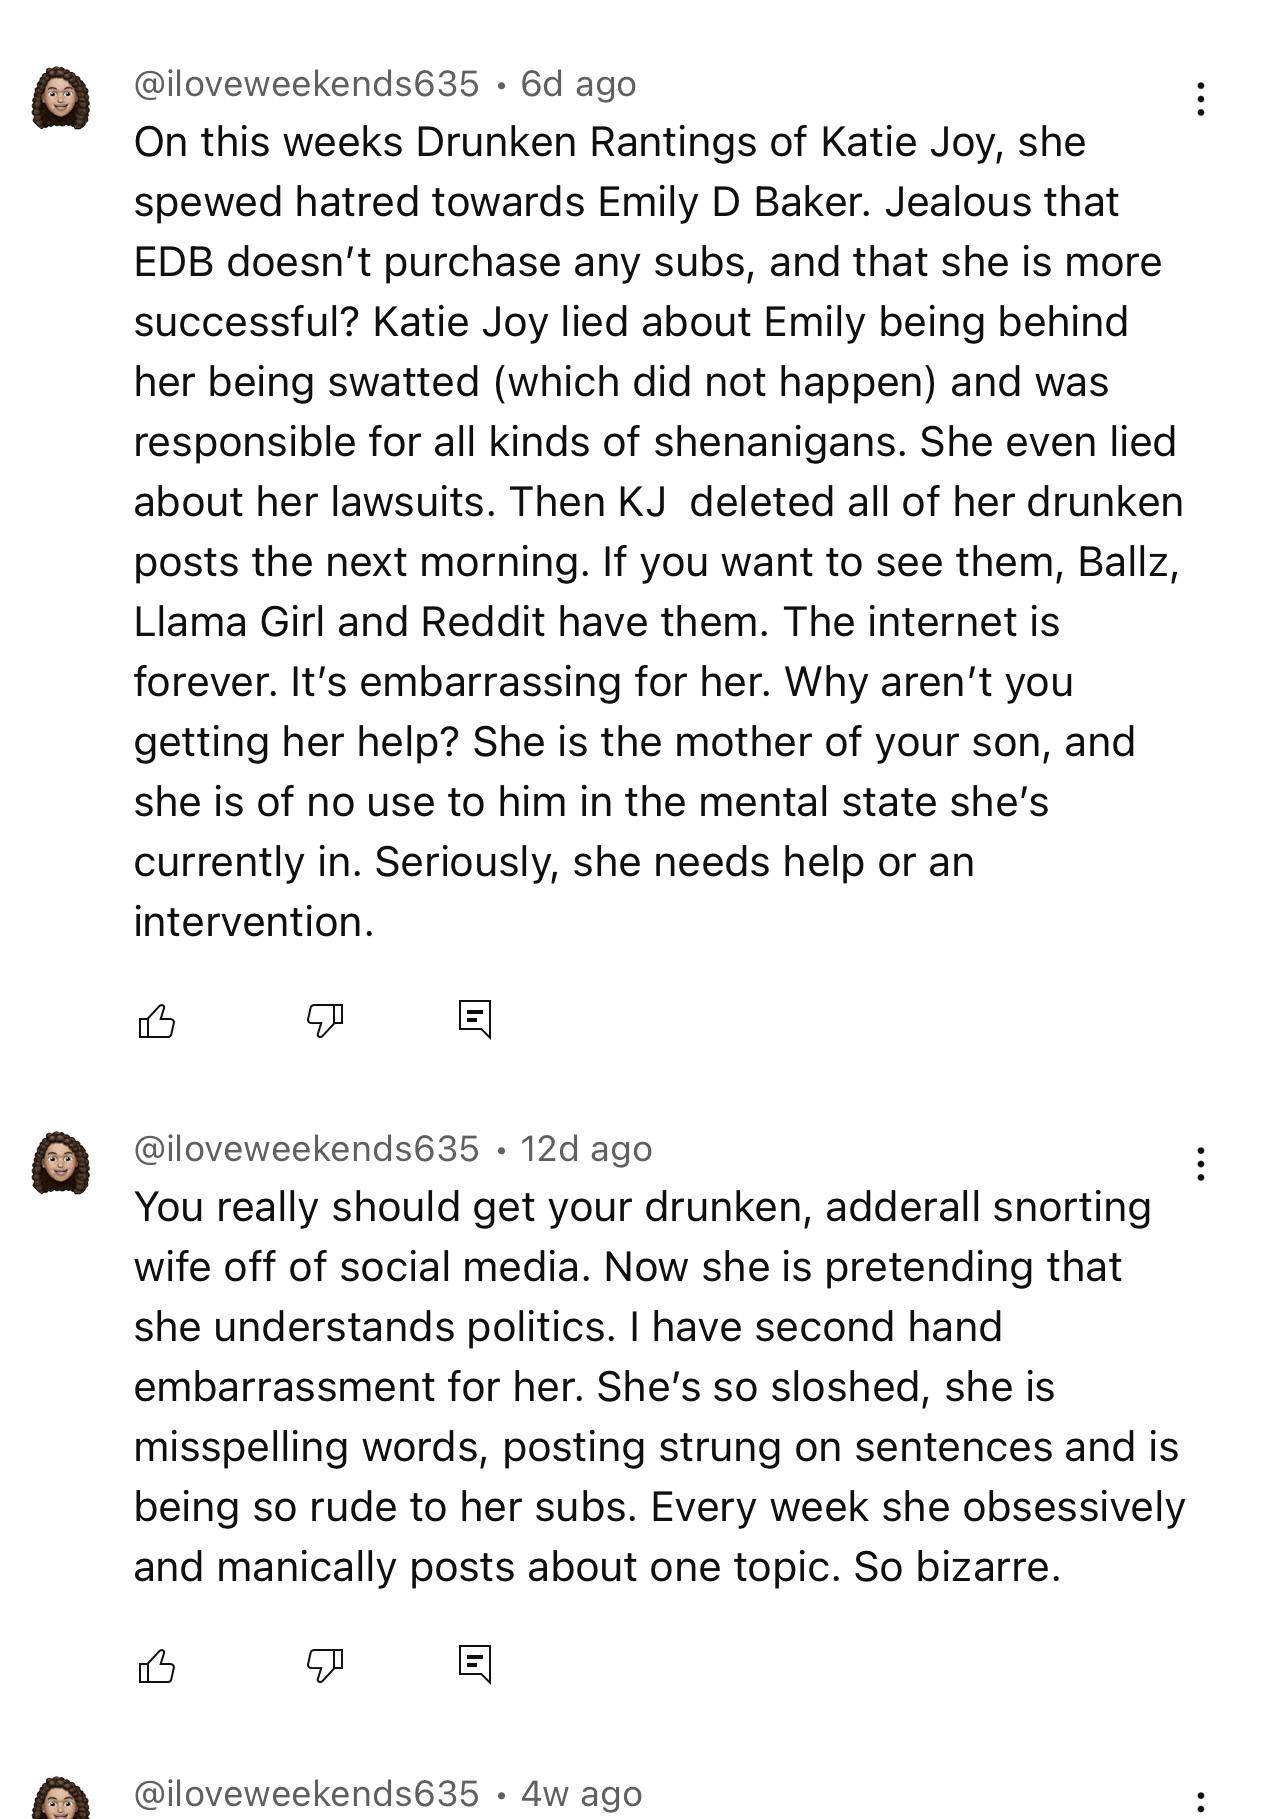 Some hateful comments for the lies of katie joy